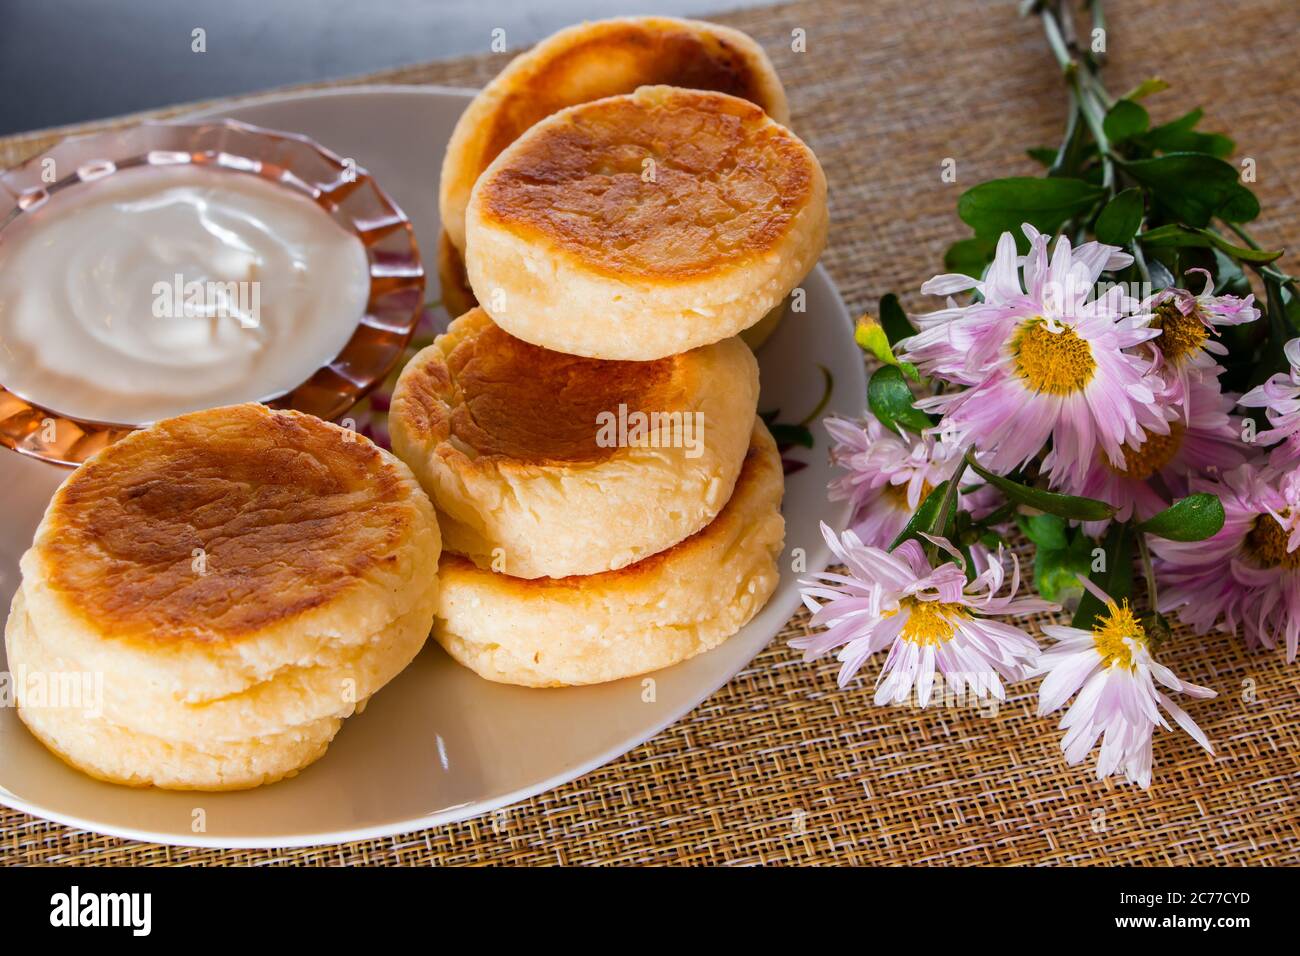 Homemade breakfast - delicious cottage cheese pancakes on a plate with jam and sour cream. Stock Photo